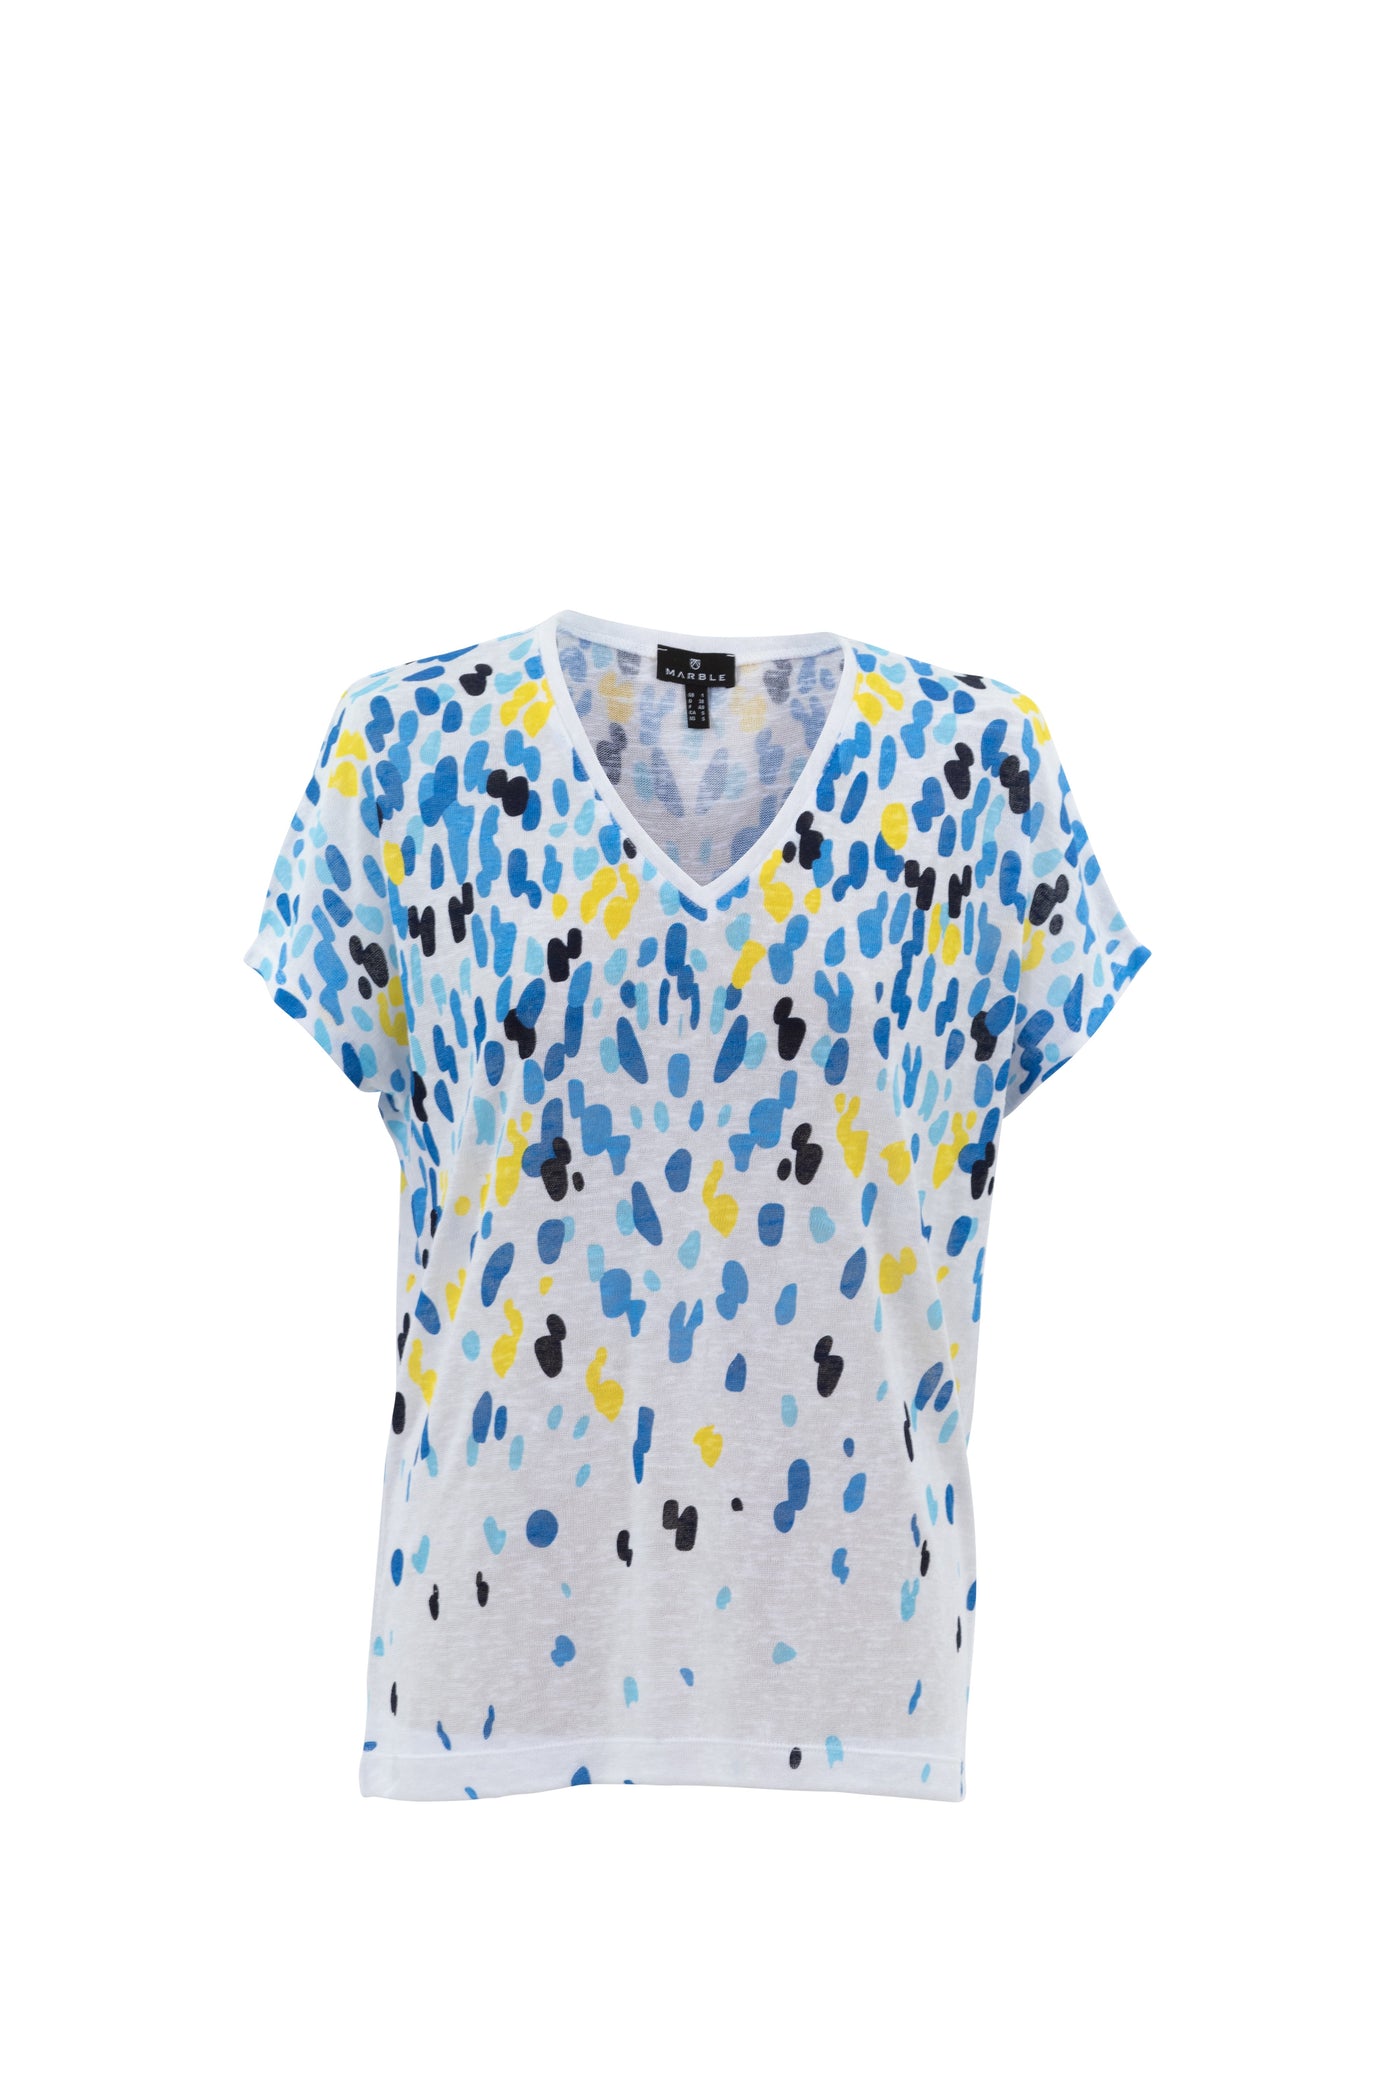 Blue, Yellow & Black Dotted T-Shirt